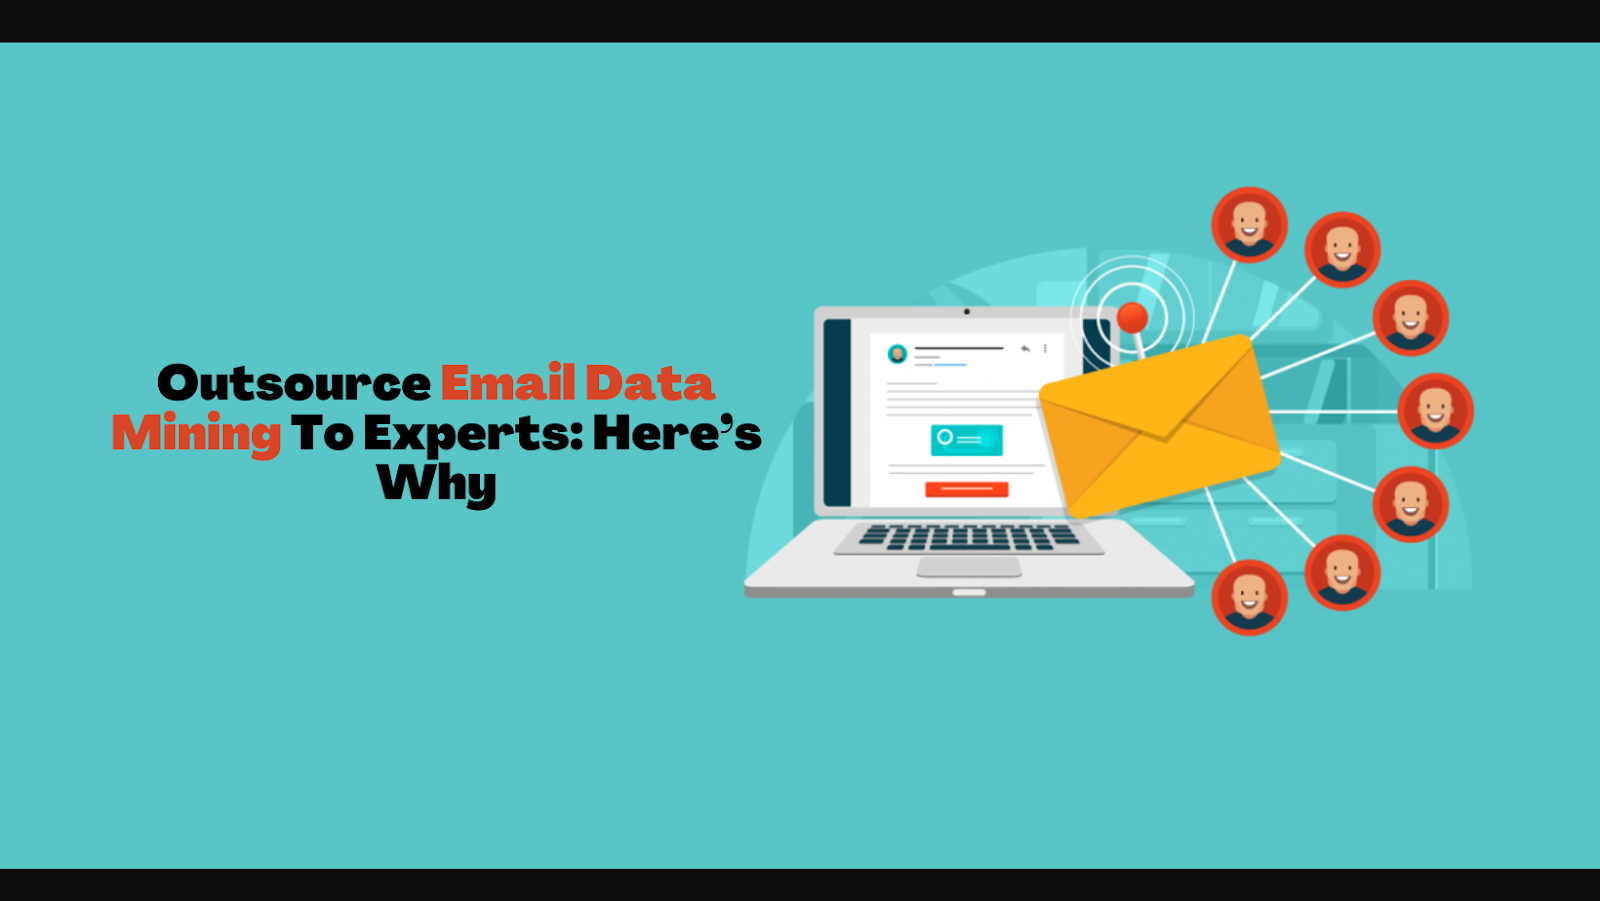 Outsource Email Data Mining To Experts: Here’s Why